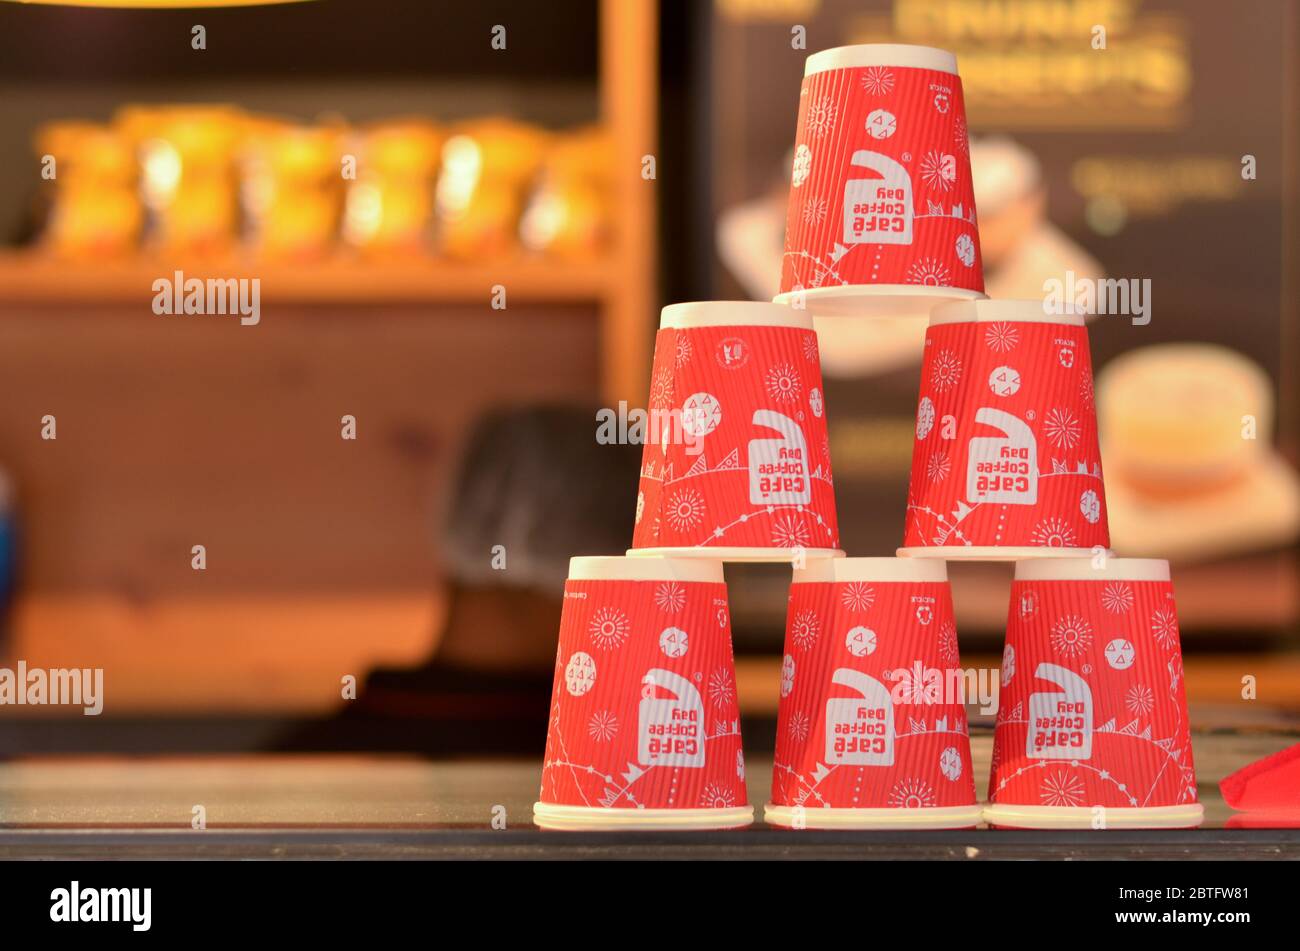 New Delhi, India, 2020. Red disposable cups with CCD (Cafe Coffee Day) logo stacked on top of each other making pyramids on the counter for display Stock Photo